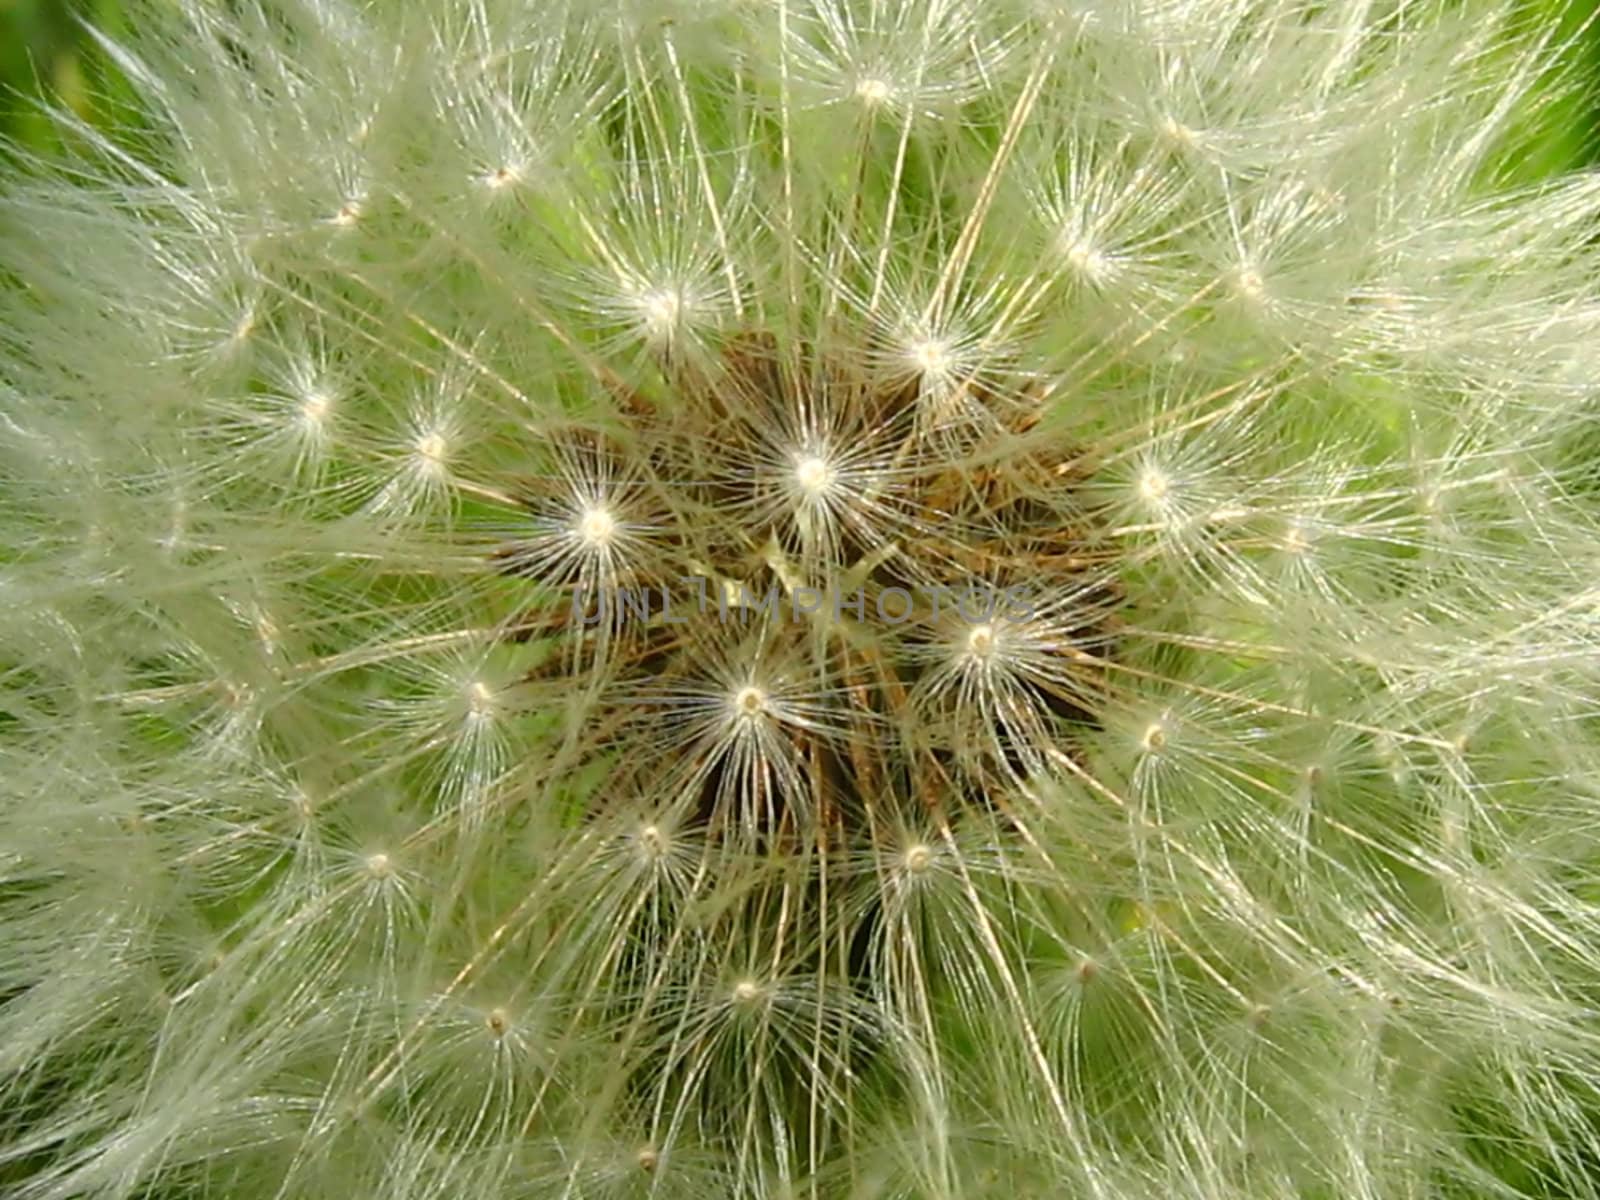 A photograph of the seeds of a Dandelion flower (Latin  Name: Taraxacum officinale).